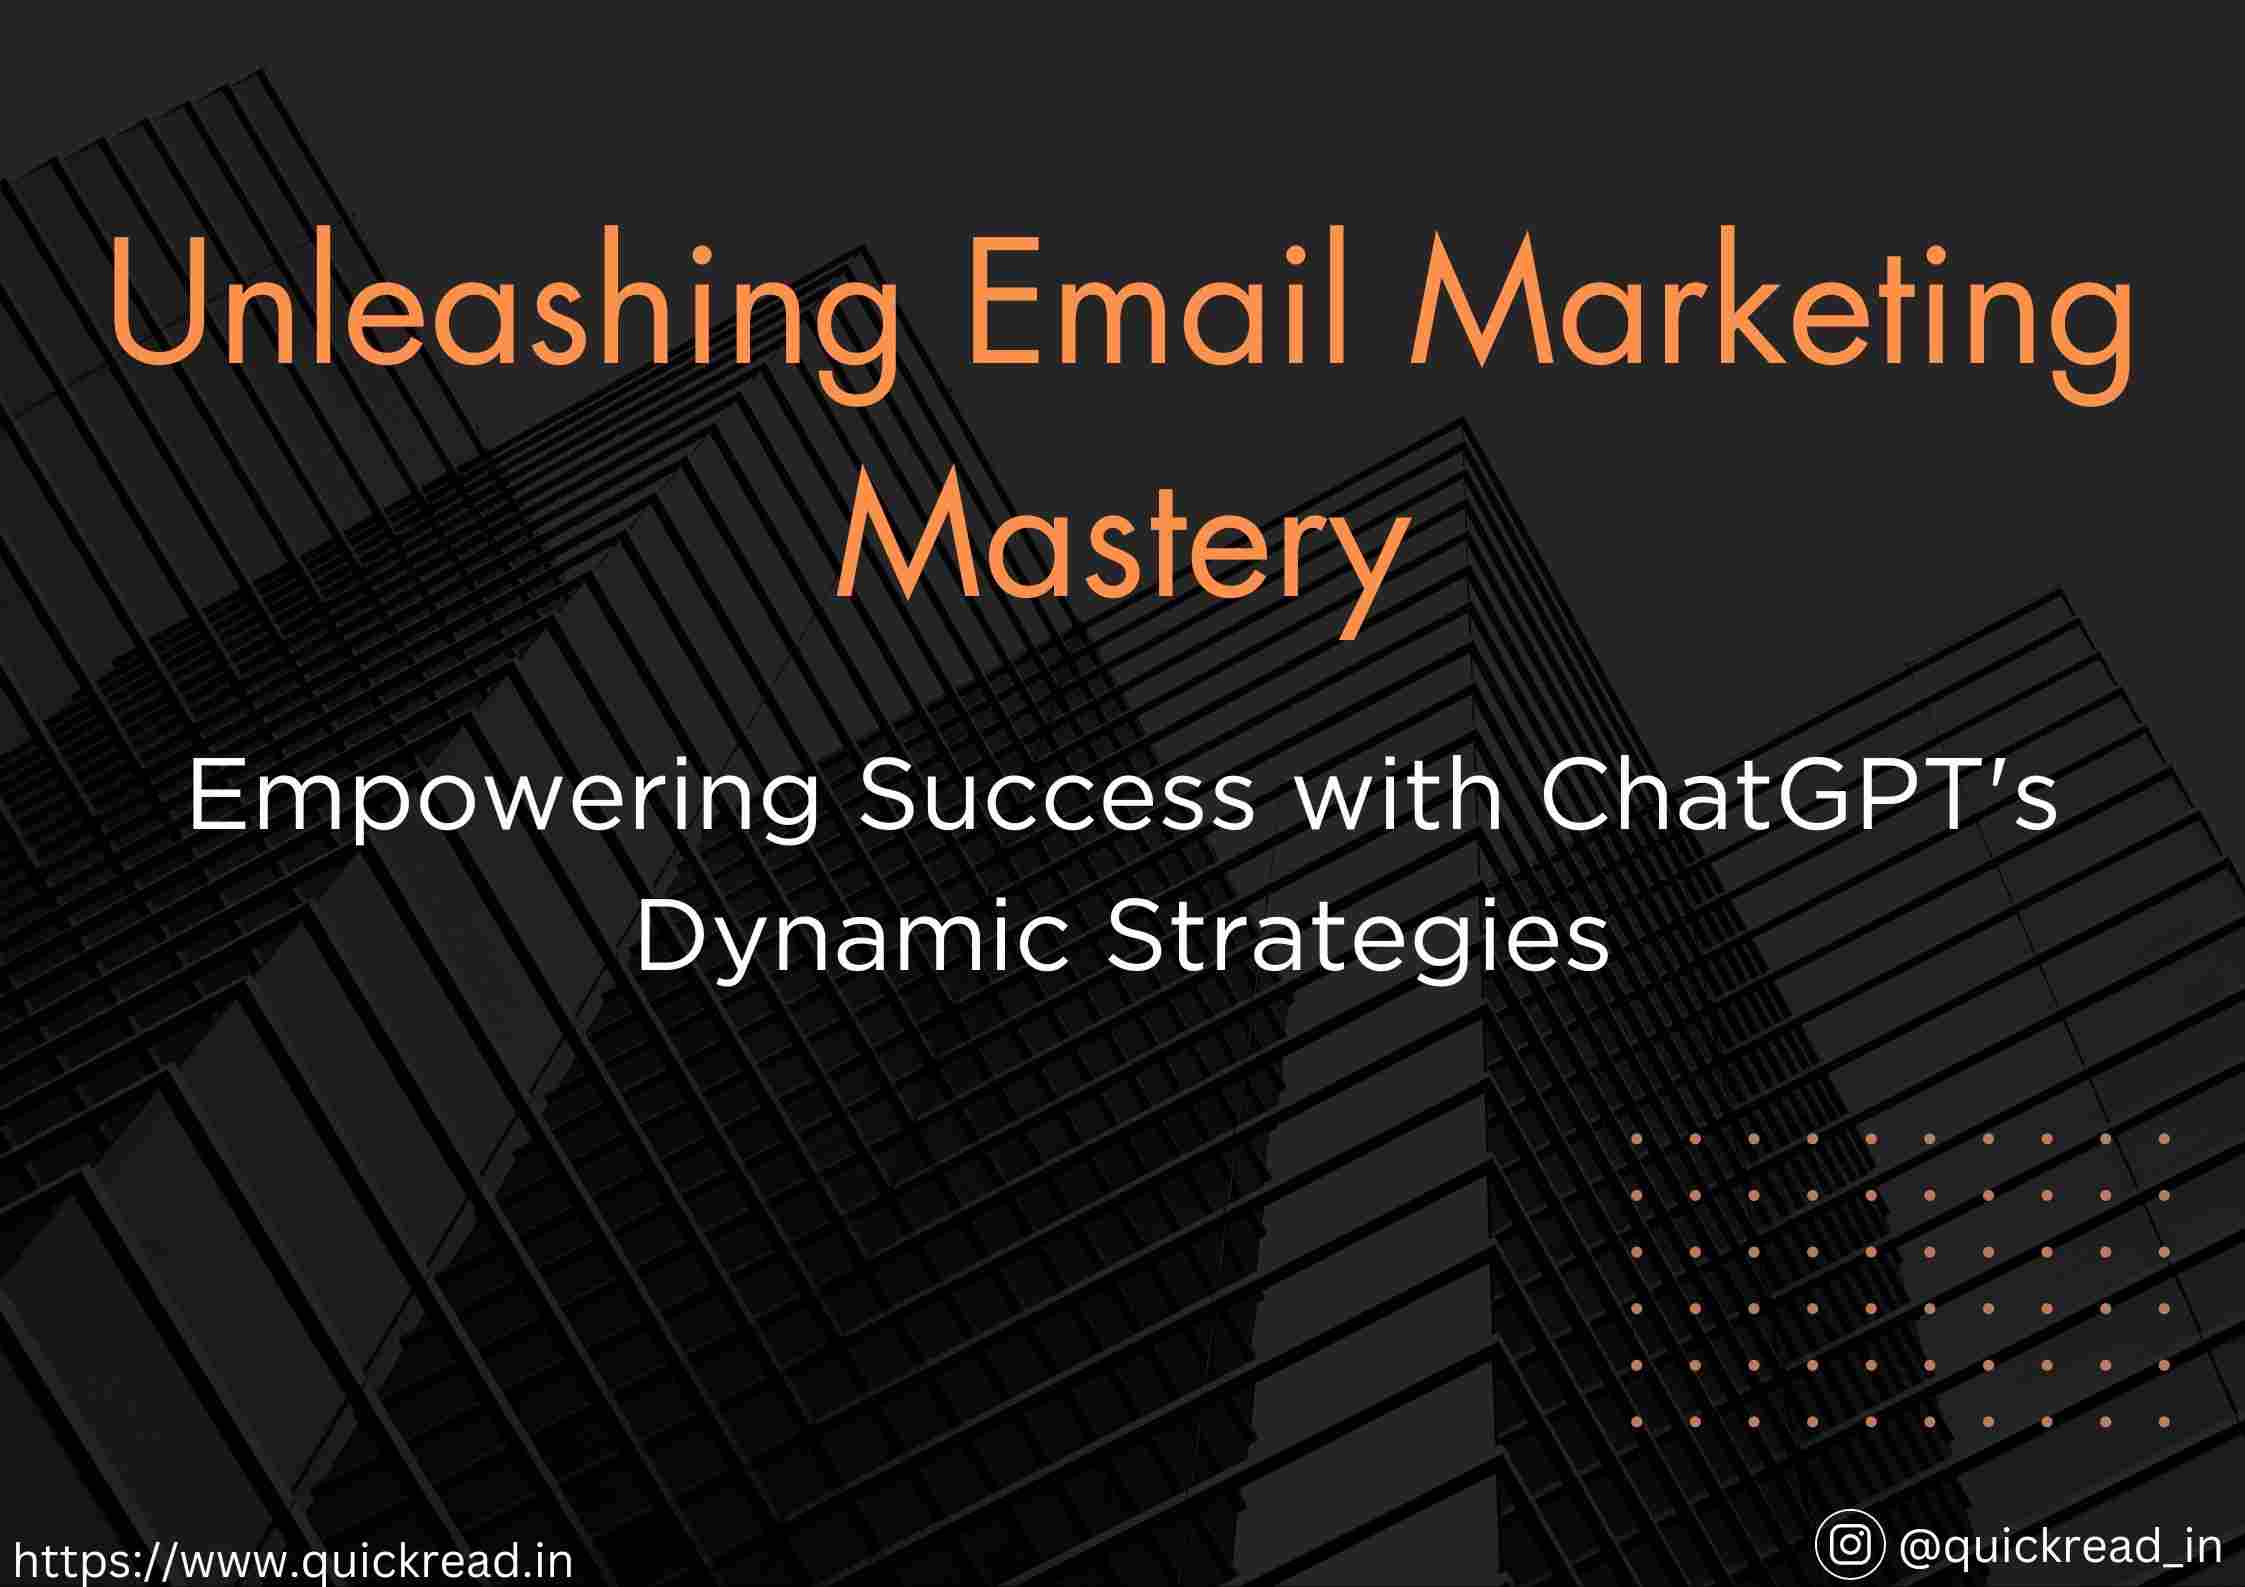 Unleashing Email Marketing Mastery Empowering Success with ChatGPT's Dynamic Strategies